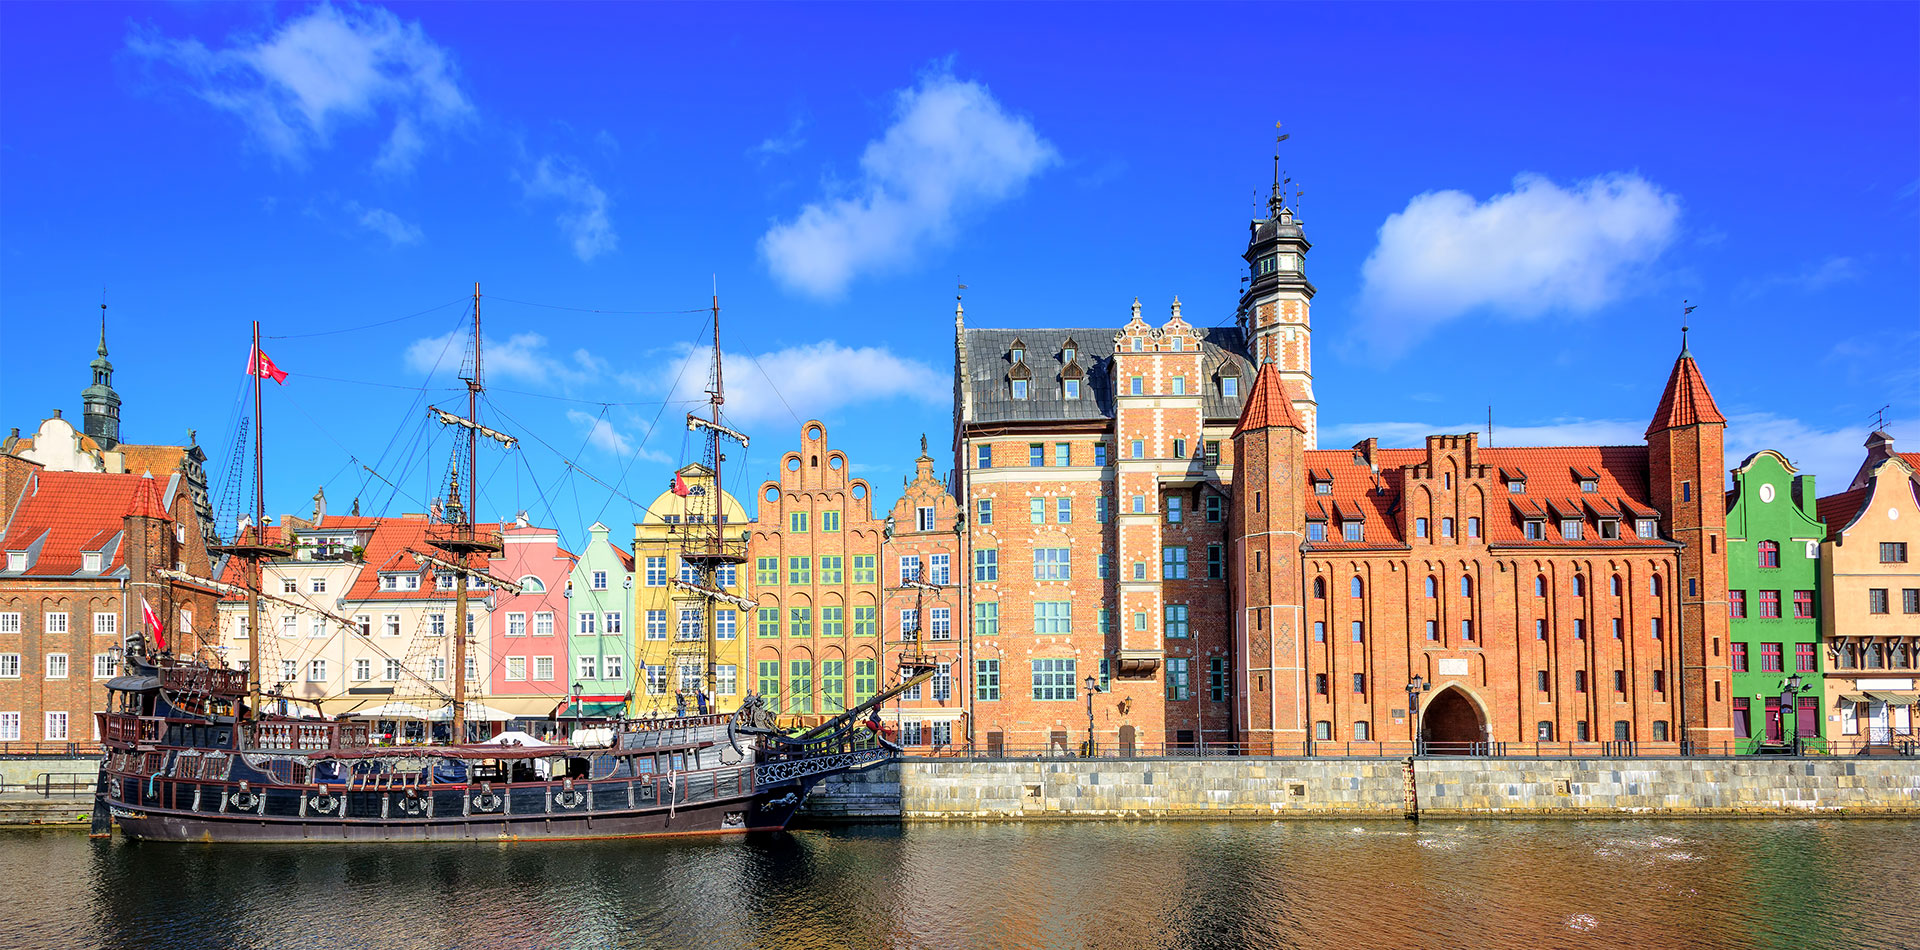 View of Gdansk's old Town and Brama Mariacka, Maria's Gate, from the Motlawa River, Poland